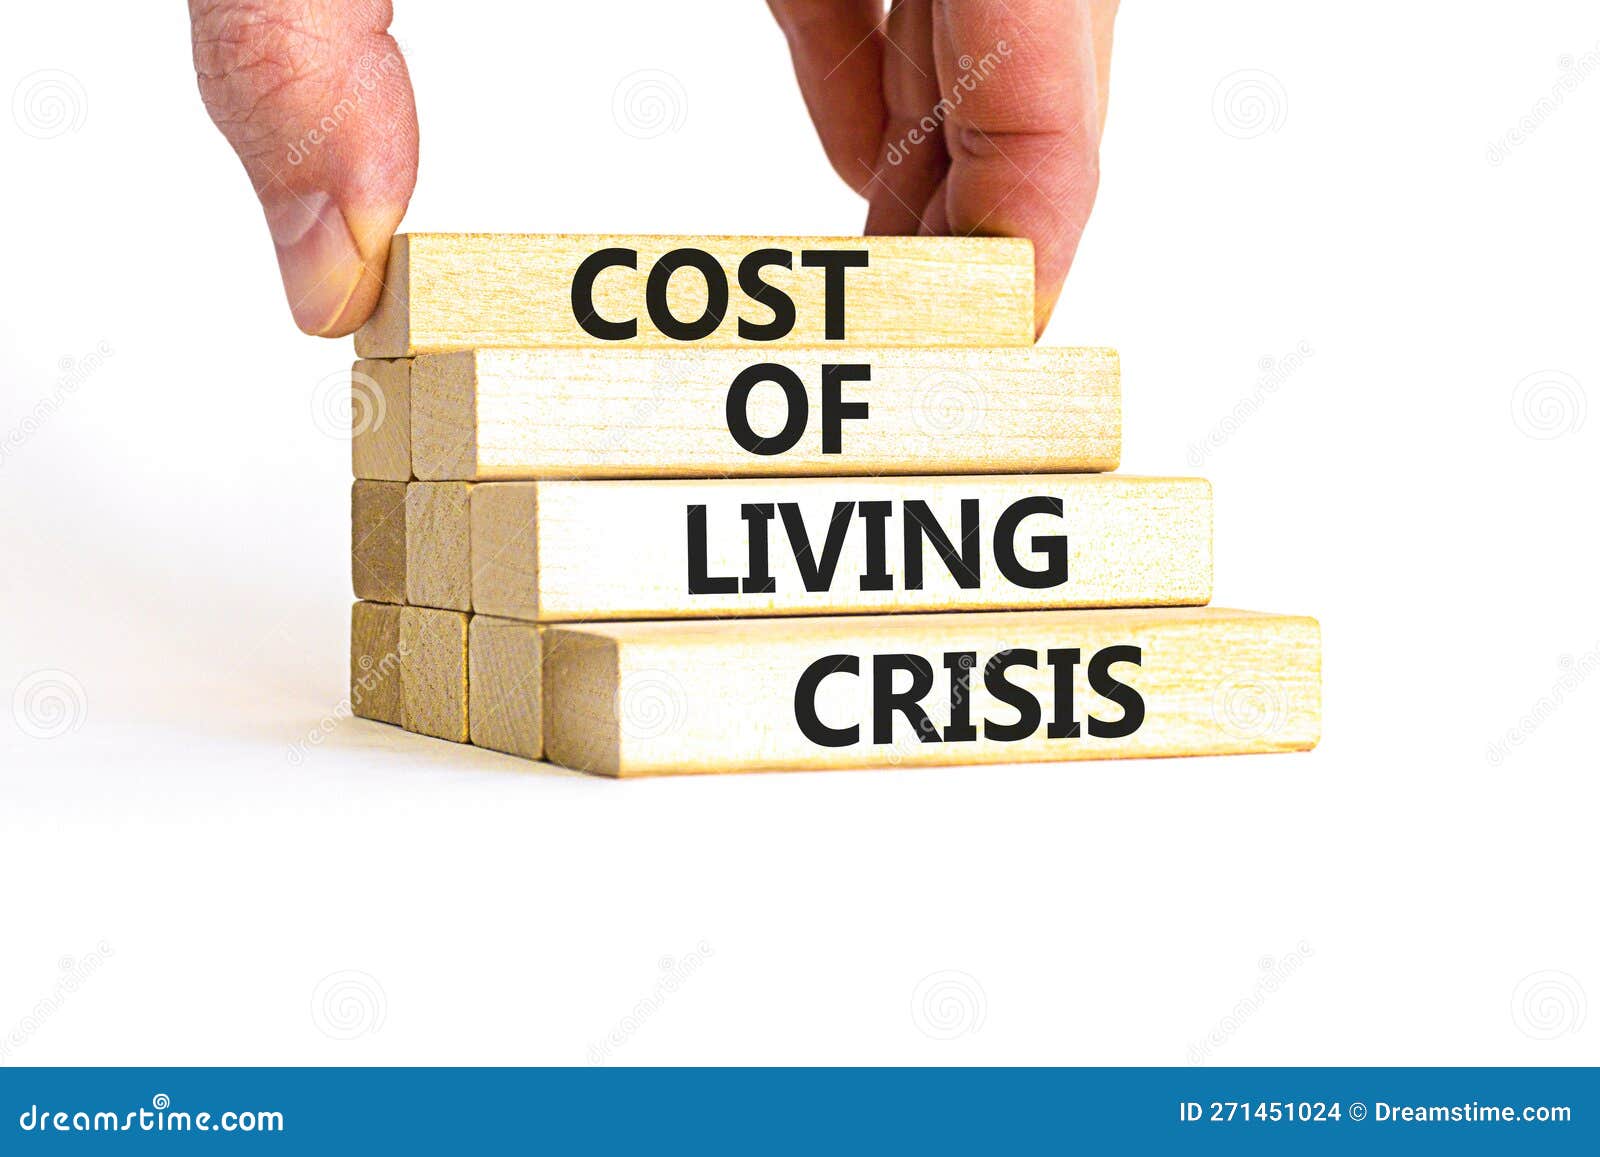 Cost of Living Crisis Symbol. Concept Words Cost of Living Crisis on Wooden Blocks. Beautiful